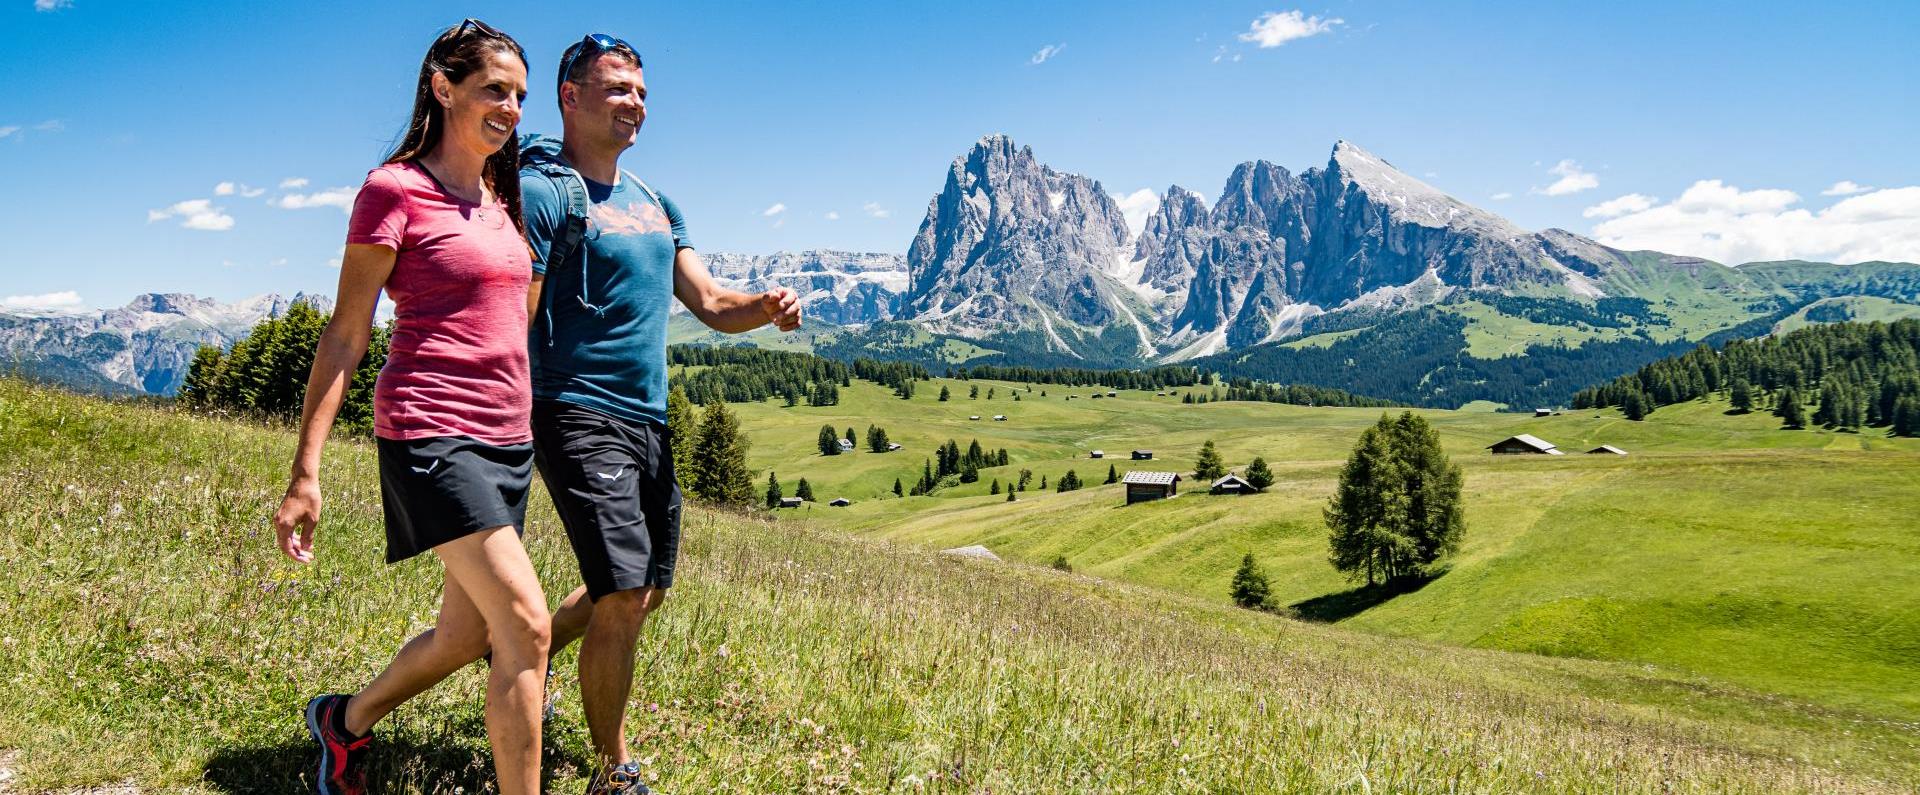 Hiking Holidays in the Dolomites, Alpe di Siusi, Italy